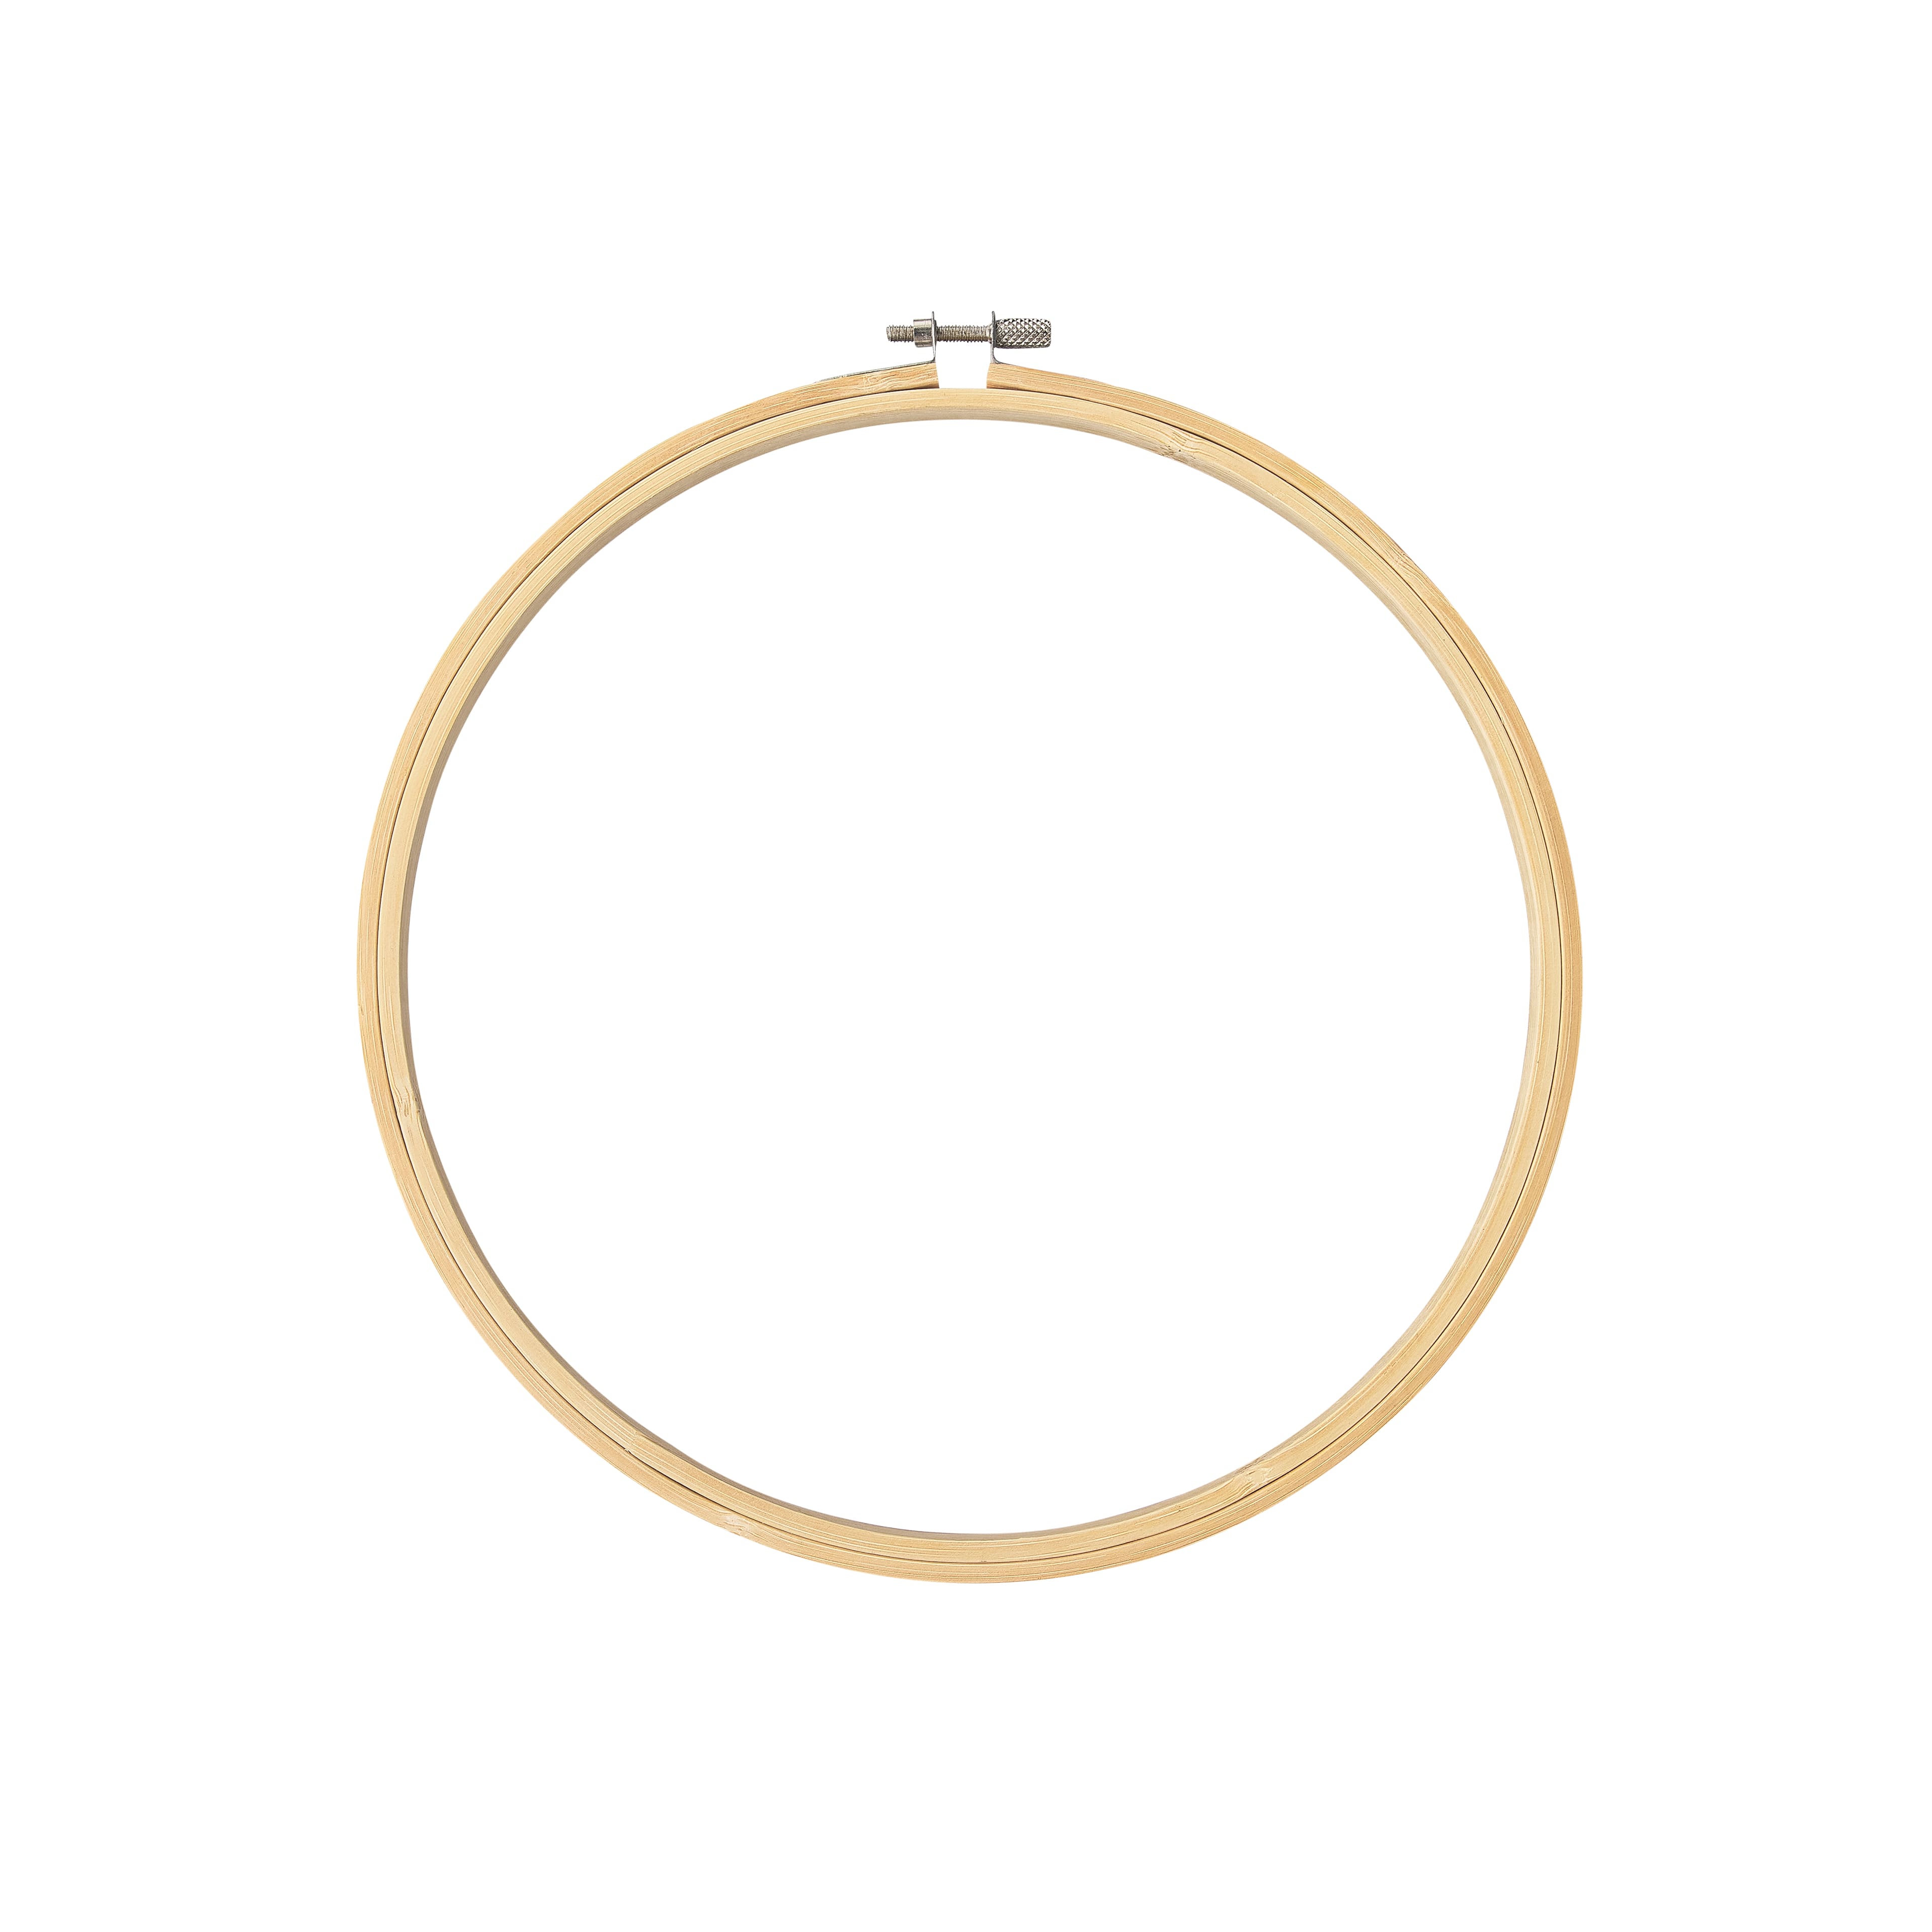 wooden hoops for crafts home decor